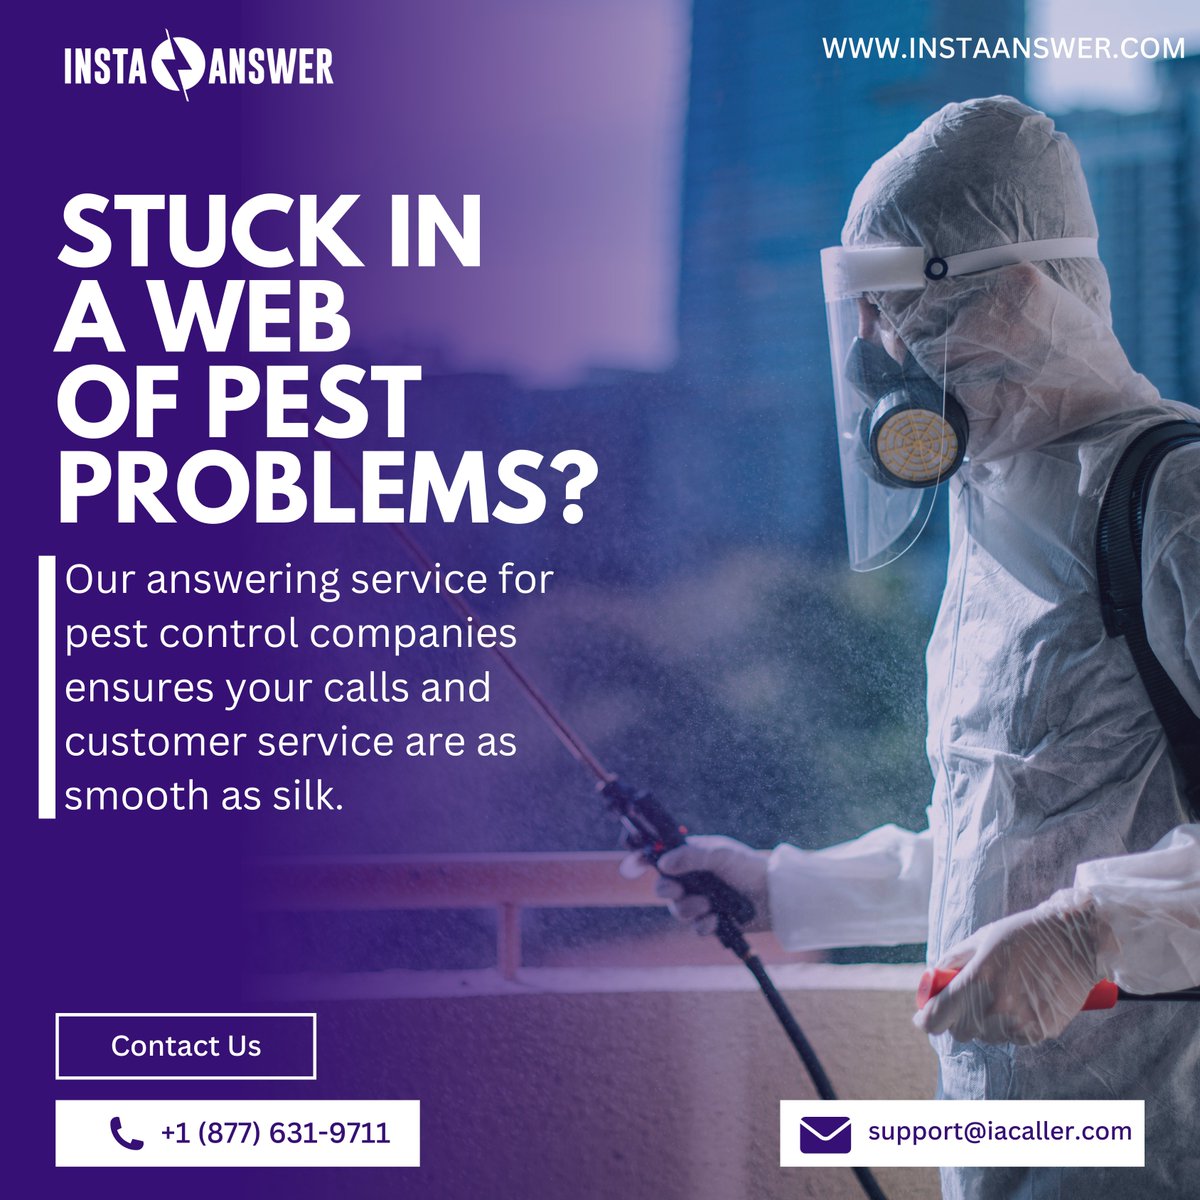 Keeping your calls pest-free and your customers buzzing with delight!  Our top-notch answering service for pest control companies is here to squash those pesky issues.

Dial (877) 631-9711 or email support@iacaller.com to let us handle the buzz!

#InstaAnswer #CustomerSupport